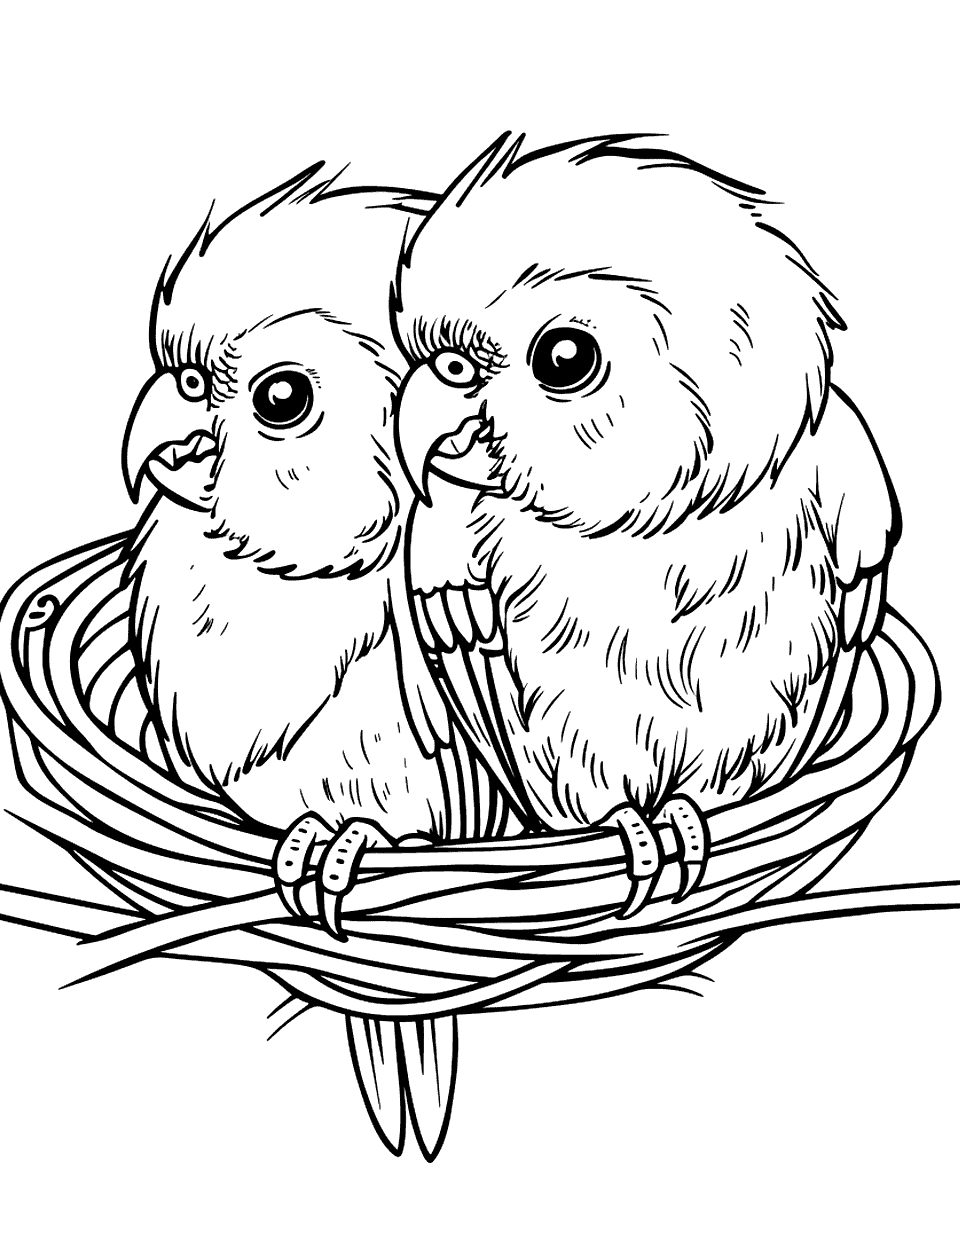 Baby Parrots in a Nest Parrot Coloring Page - Two fluffy baby parrots cuddling together in a cozy nest.